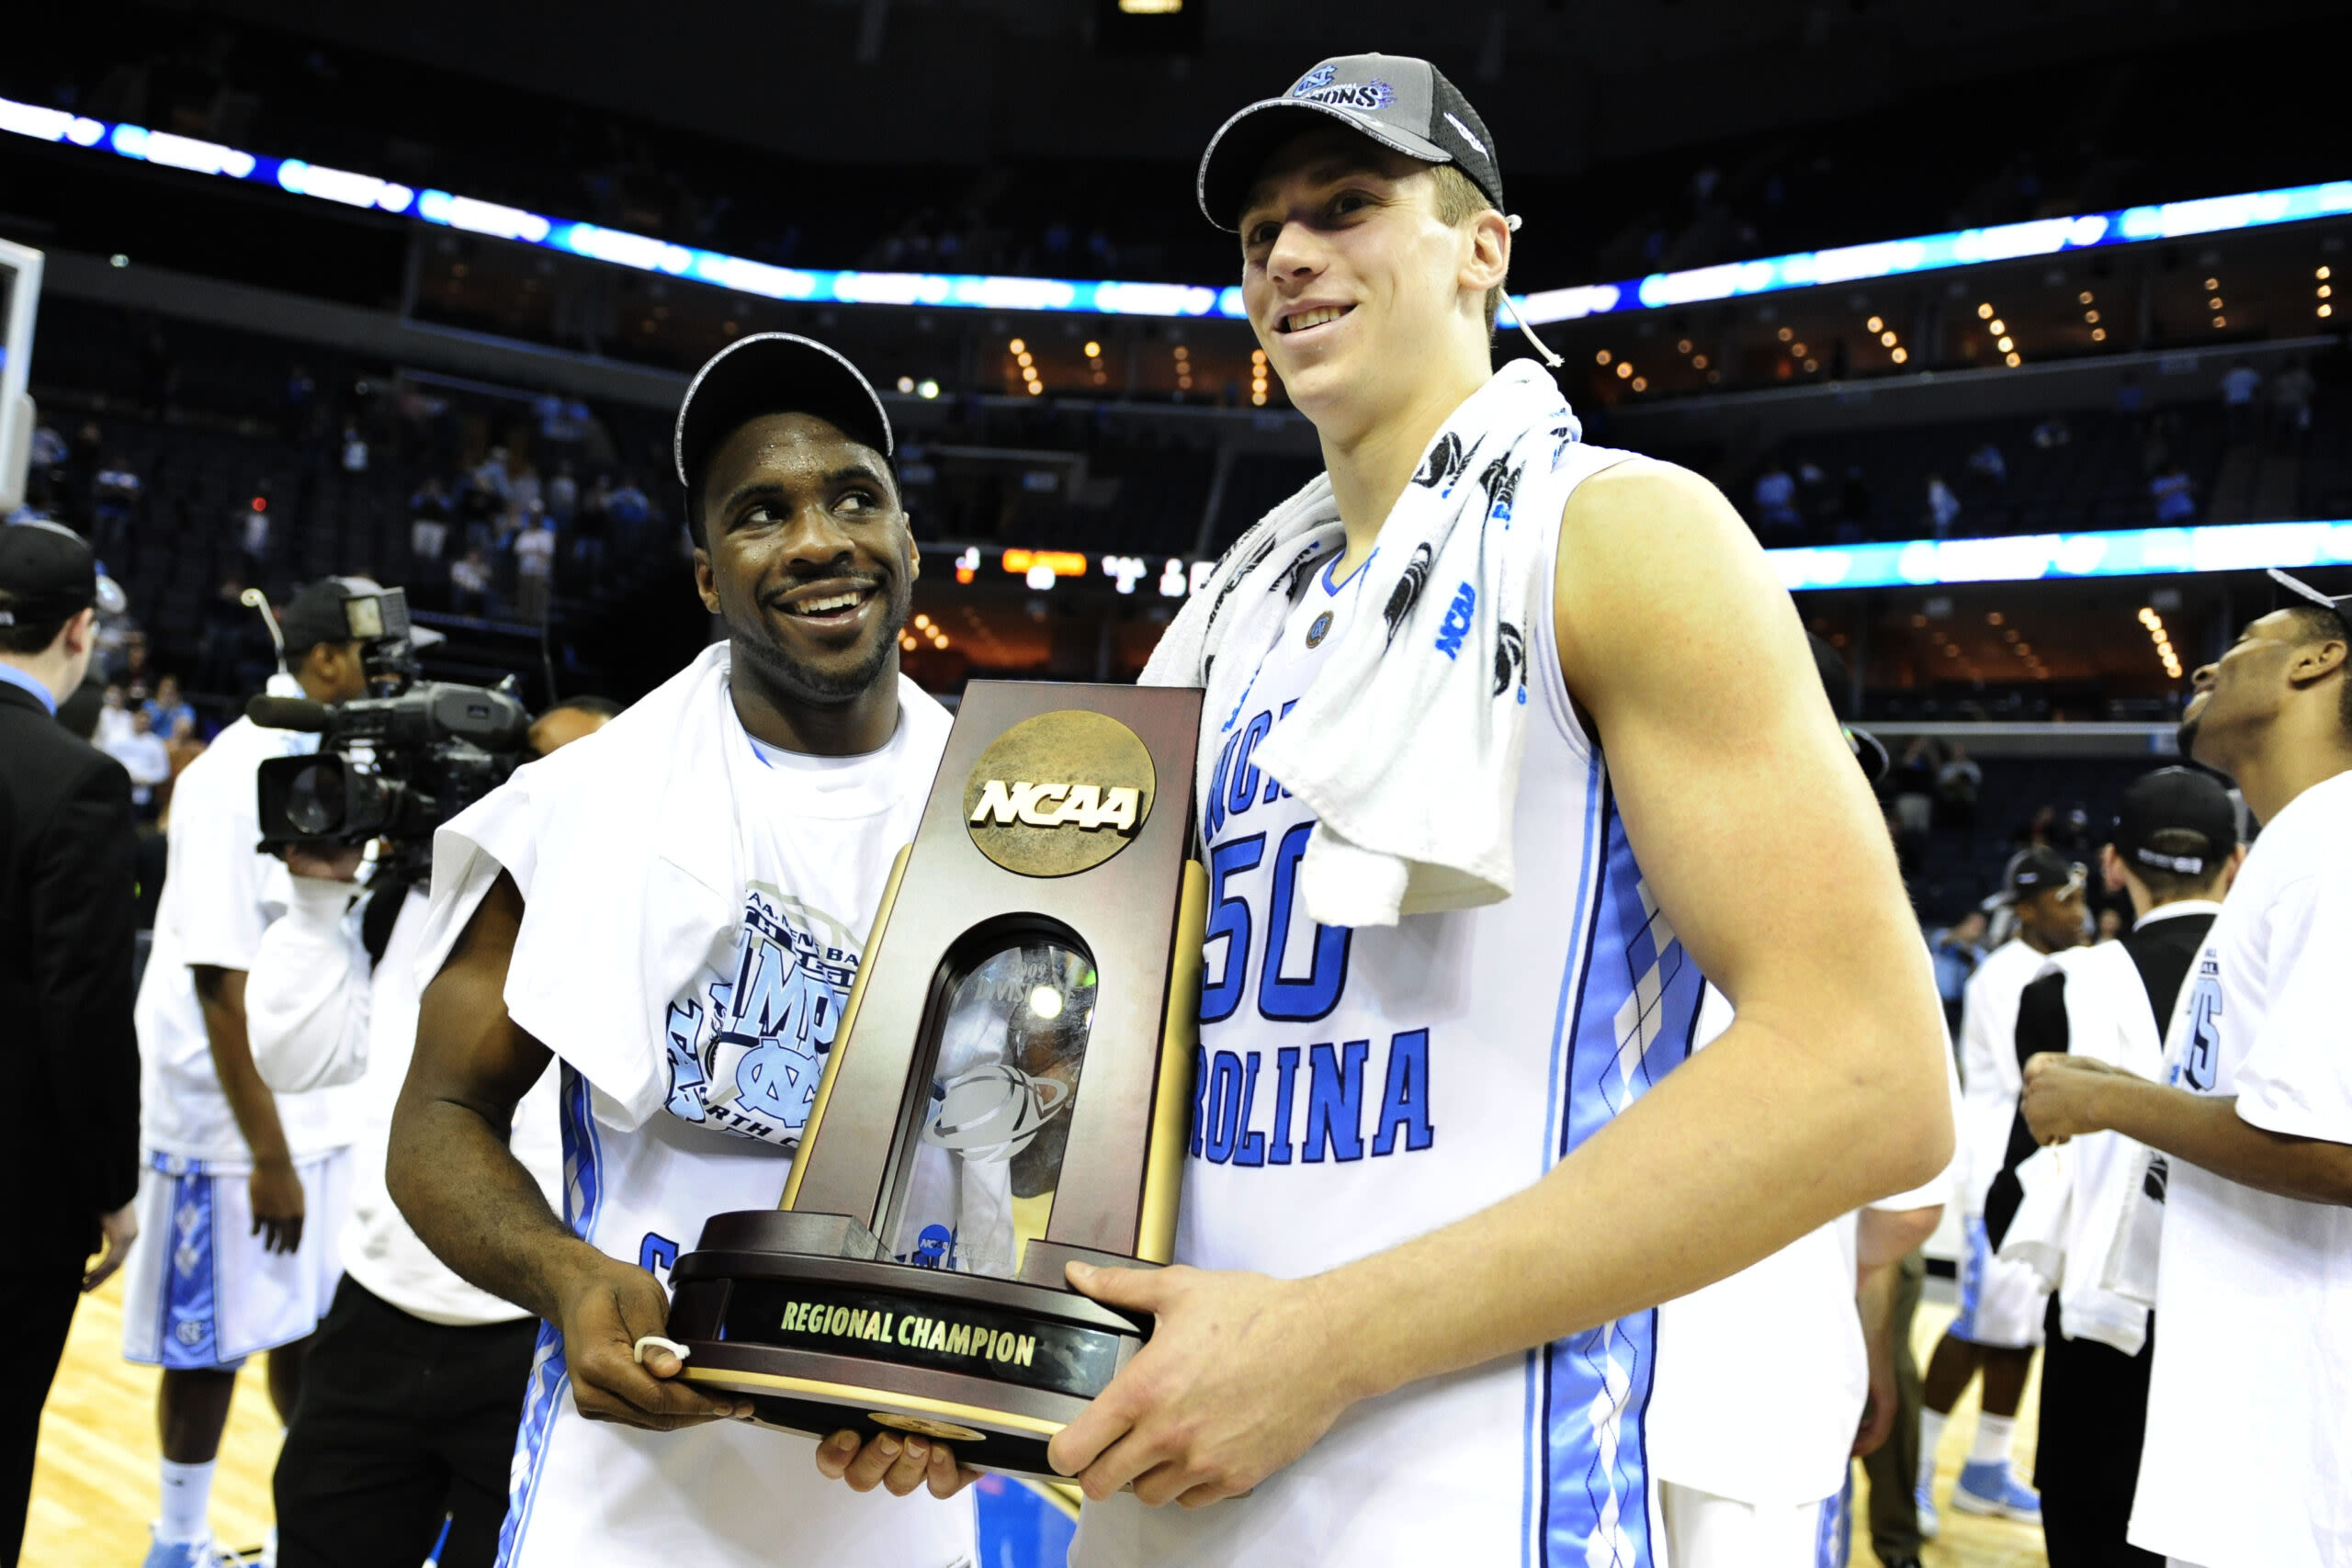 A former UNC basketball star is back on the court this Summer